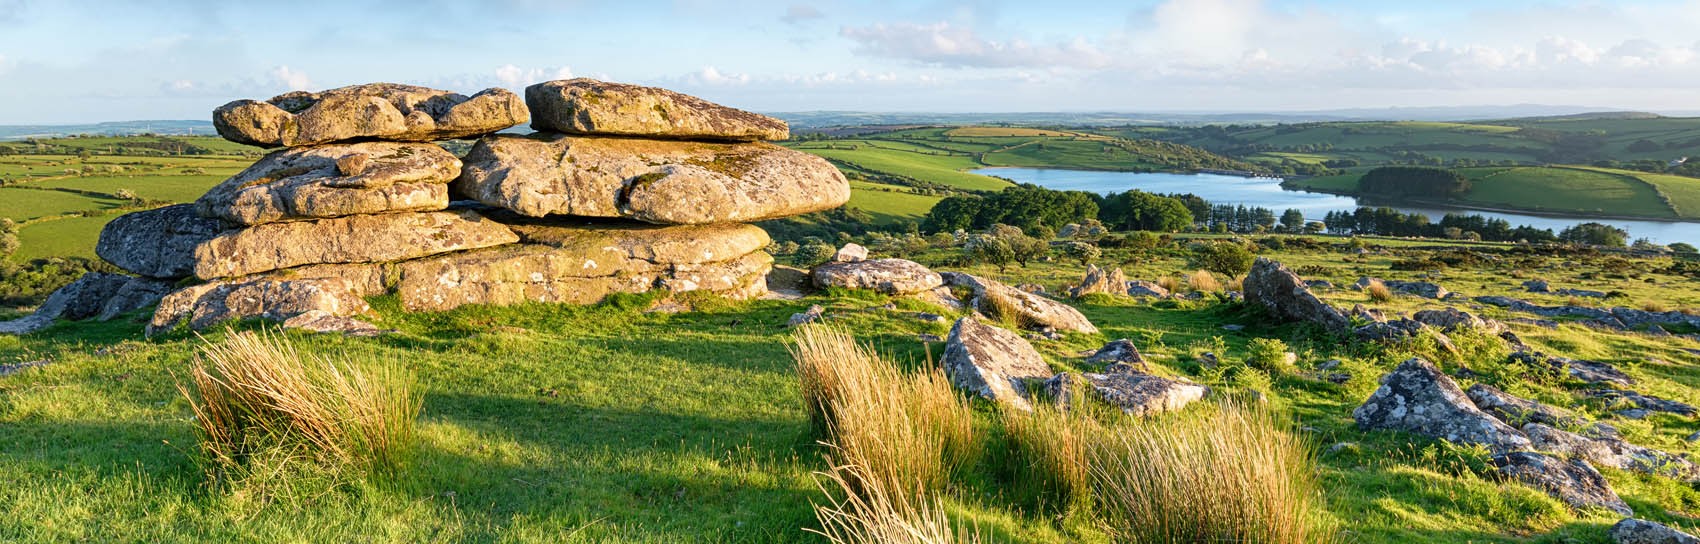 The view from Tregarrick Tor on Bodmin Moor. Photograph by HELEN HOTSON